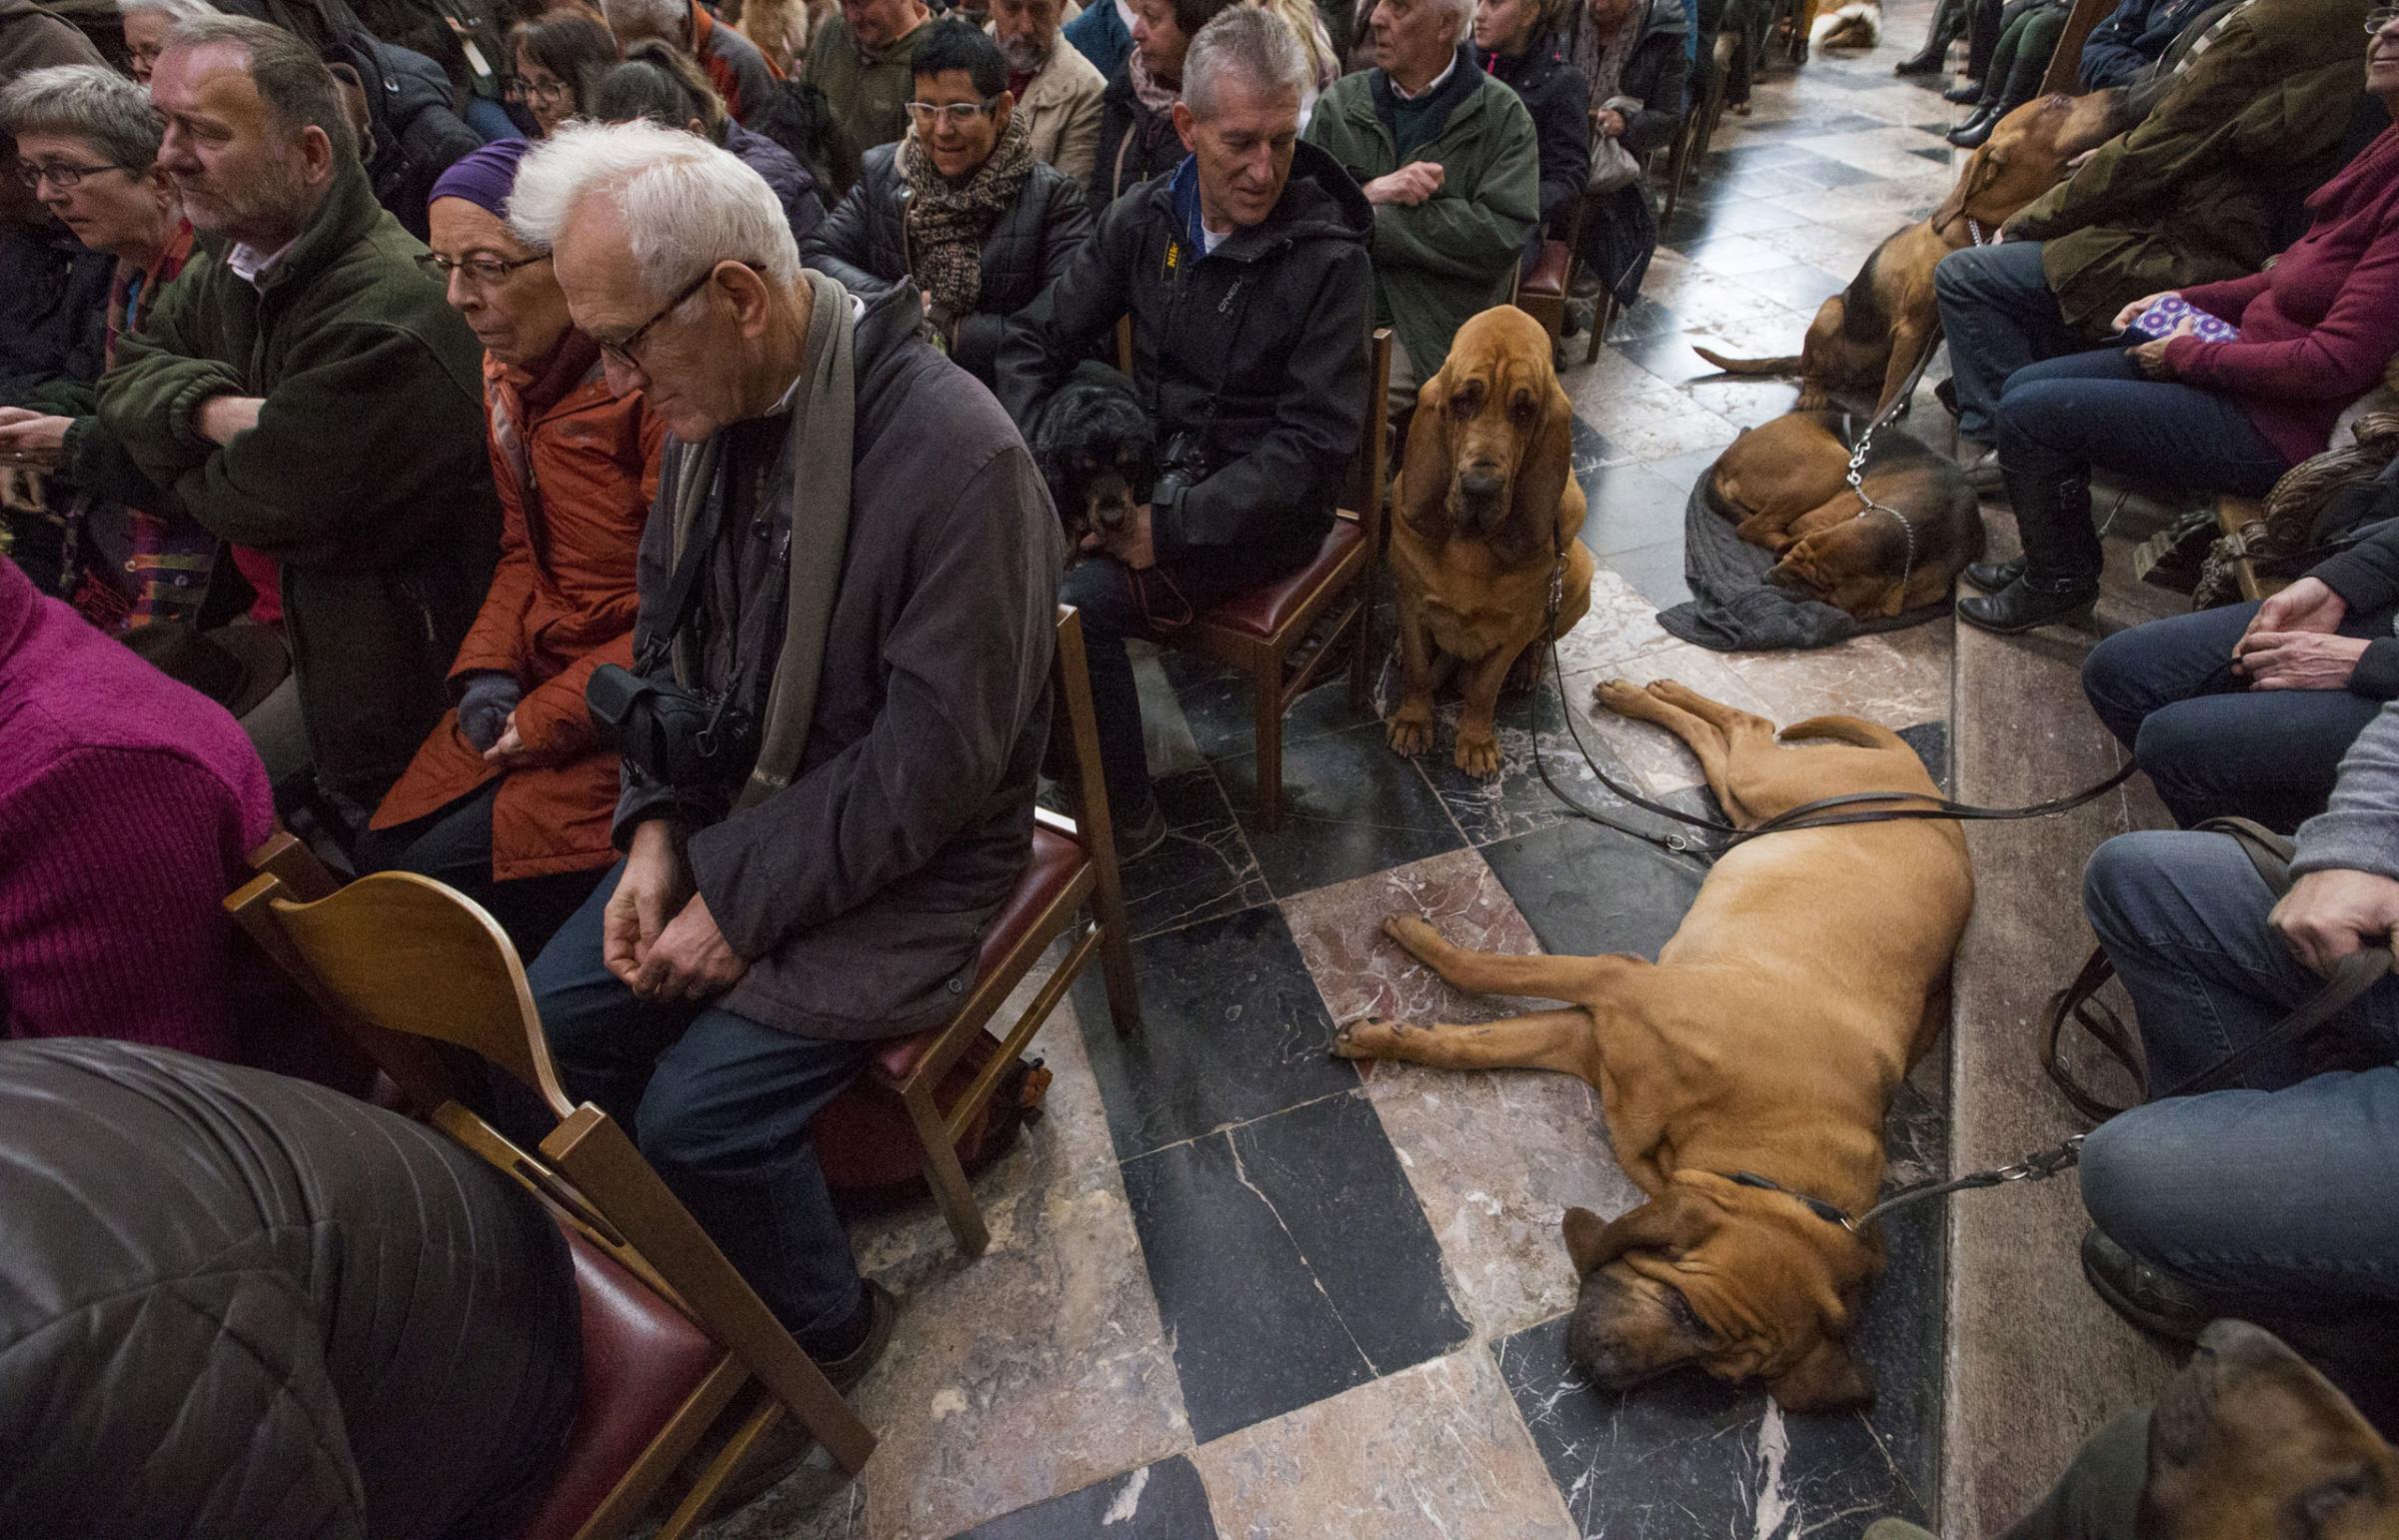 Dogs are seen among faithfuls during a religious service ahead of a blessing ceremony for animals at the Basilica of St Peter and Paul in Saint-Hubert, Belgium